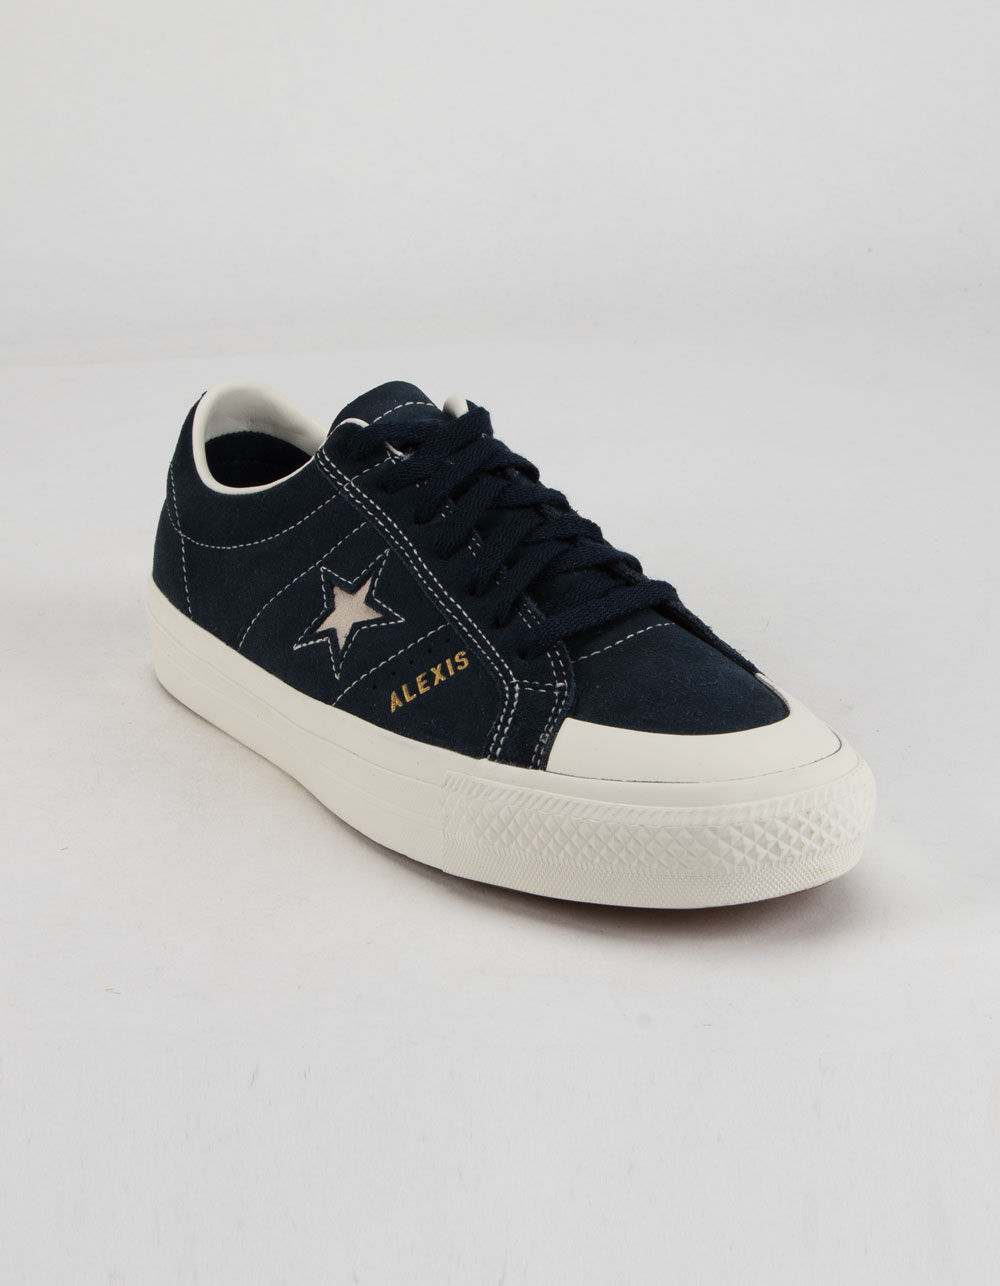 CONVERSE Alexis Sablone One Star Pro Suede Low Top Shoes